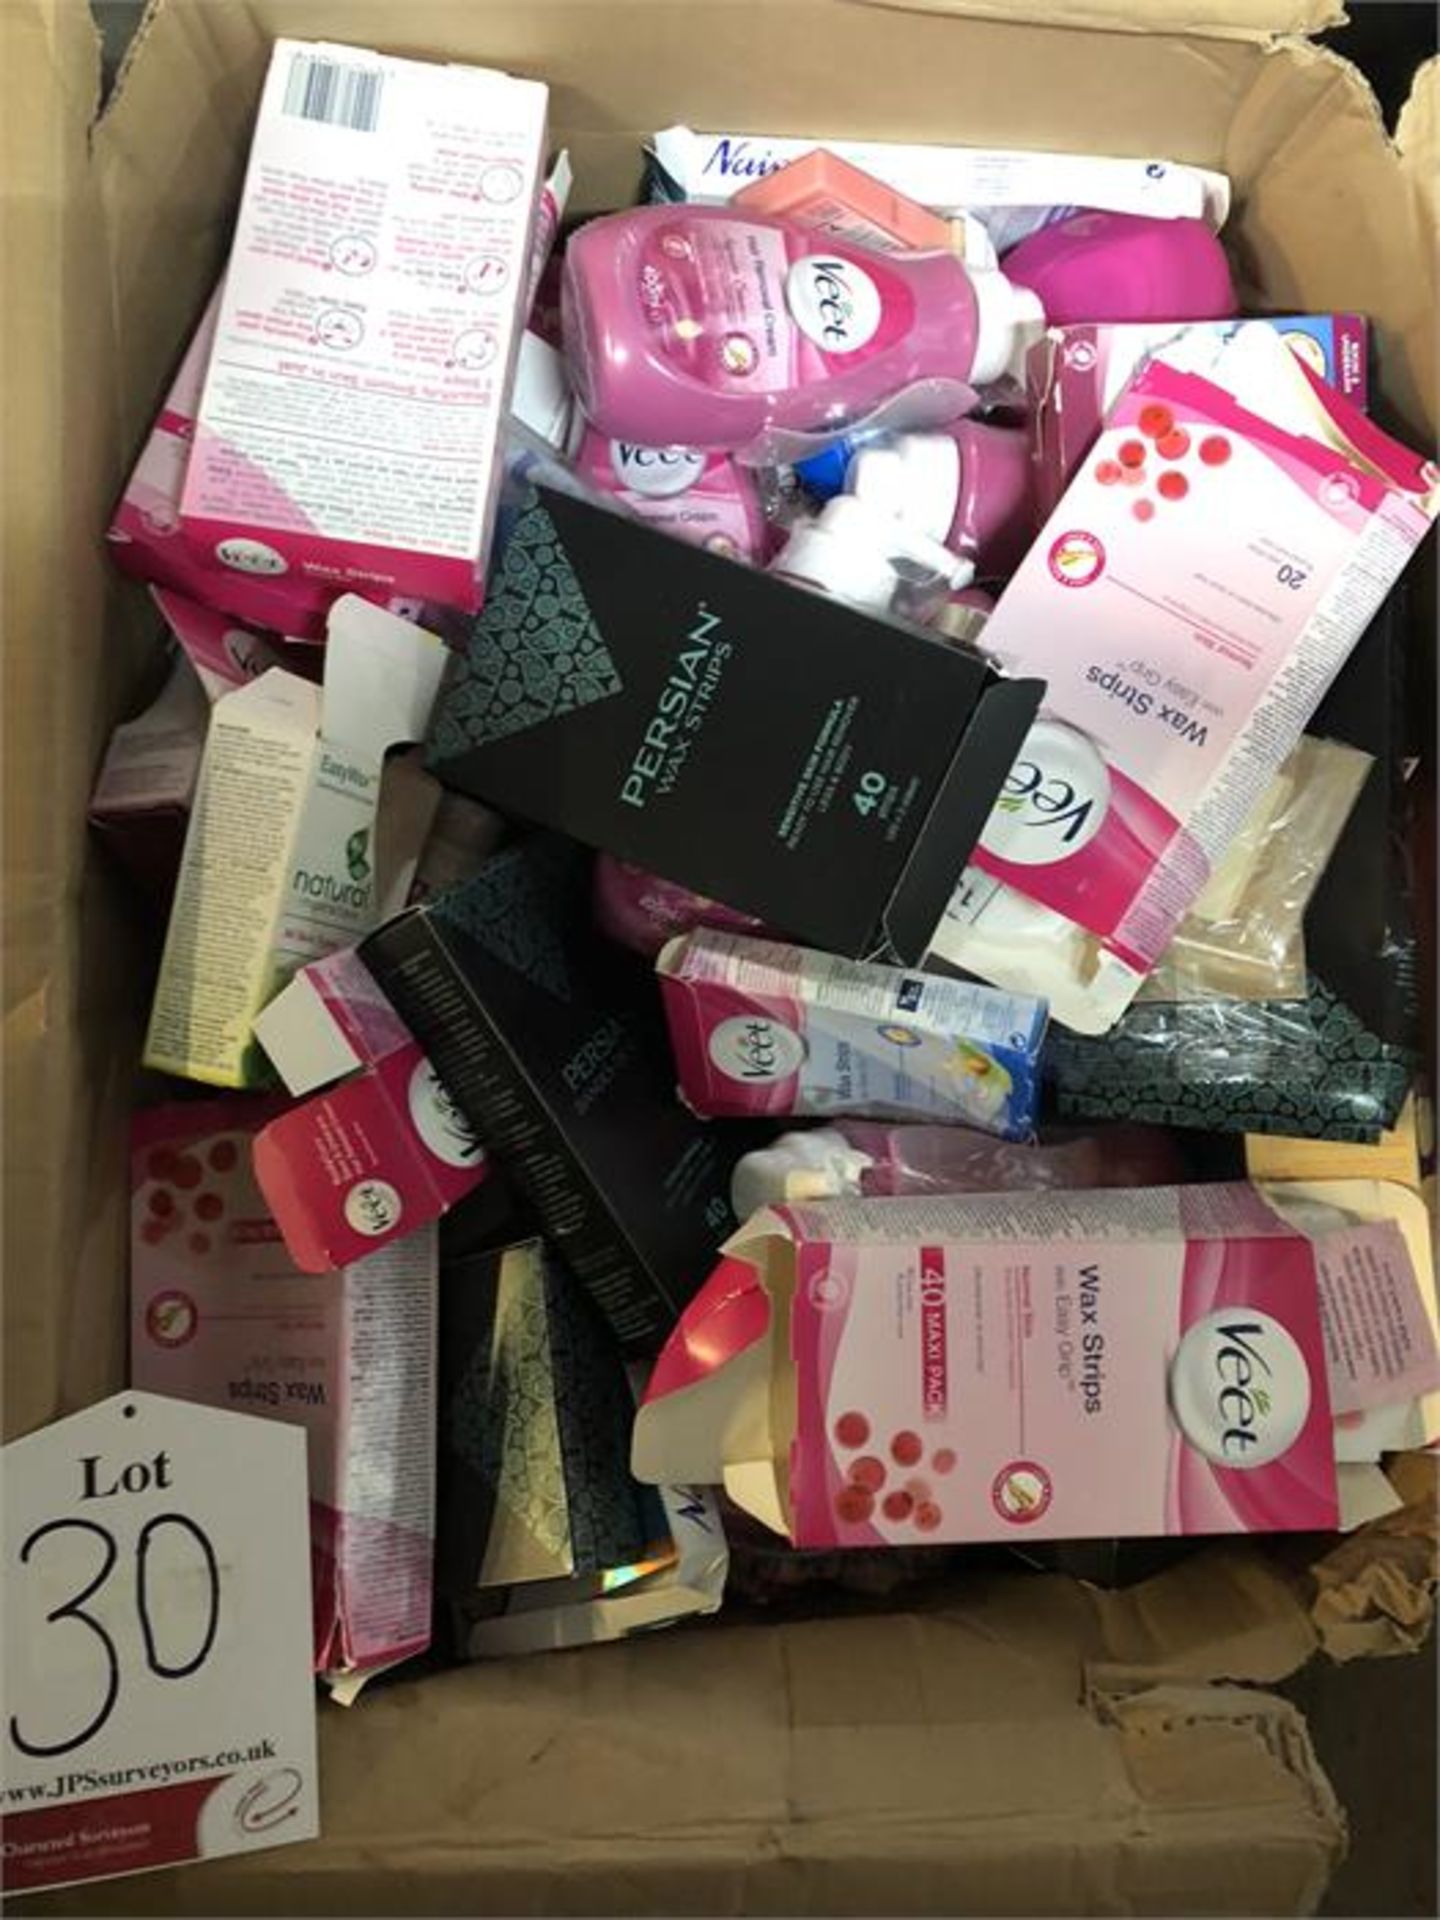 190 x Hair Removal Products/Women's Hygiene Products RRP £680 Retail Store Returns - Image 2 of 3